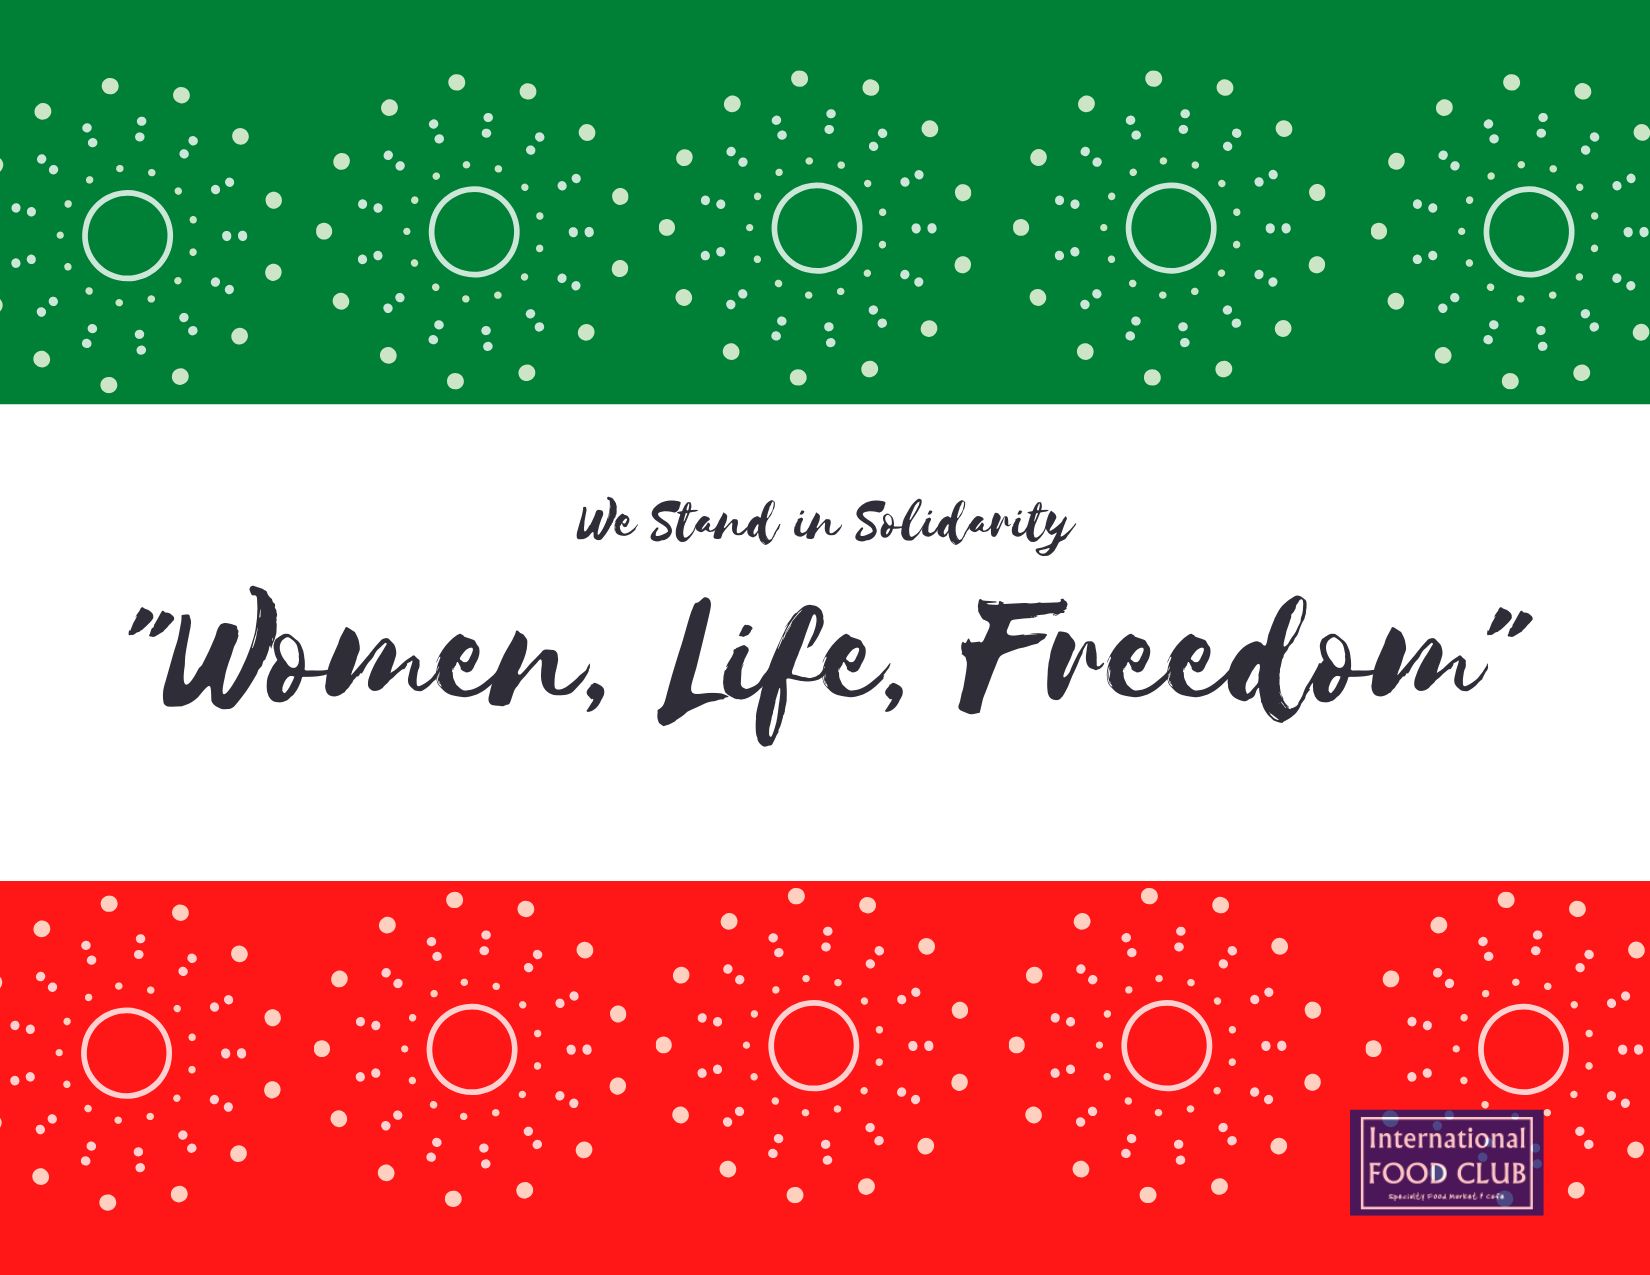 We Stand In Solidarity! Women, Life, Freedom